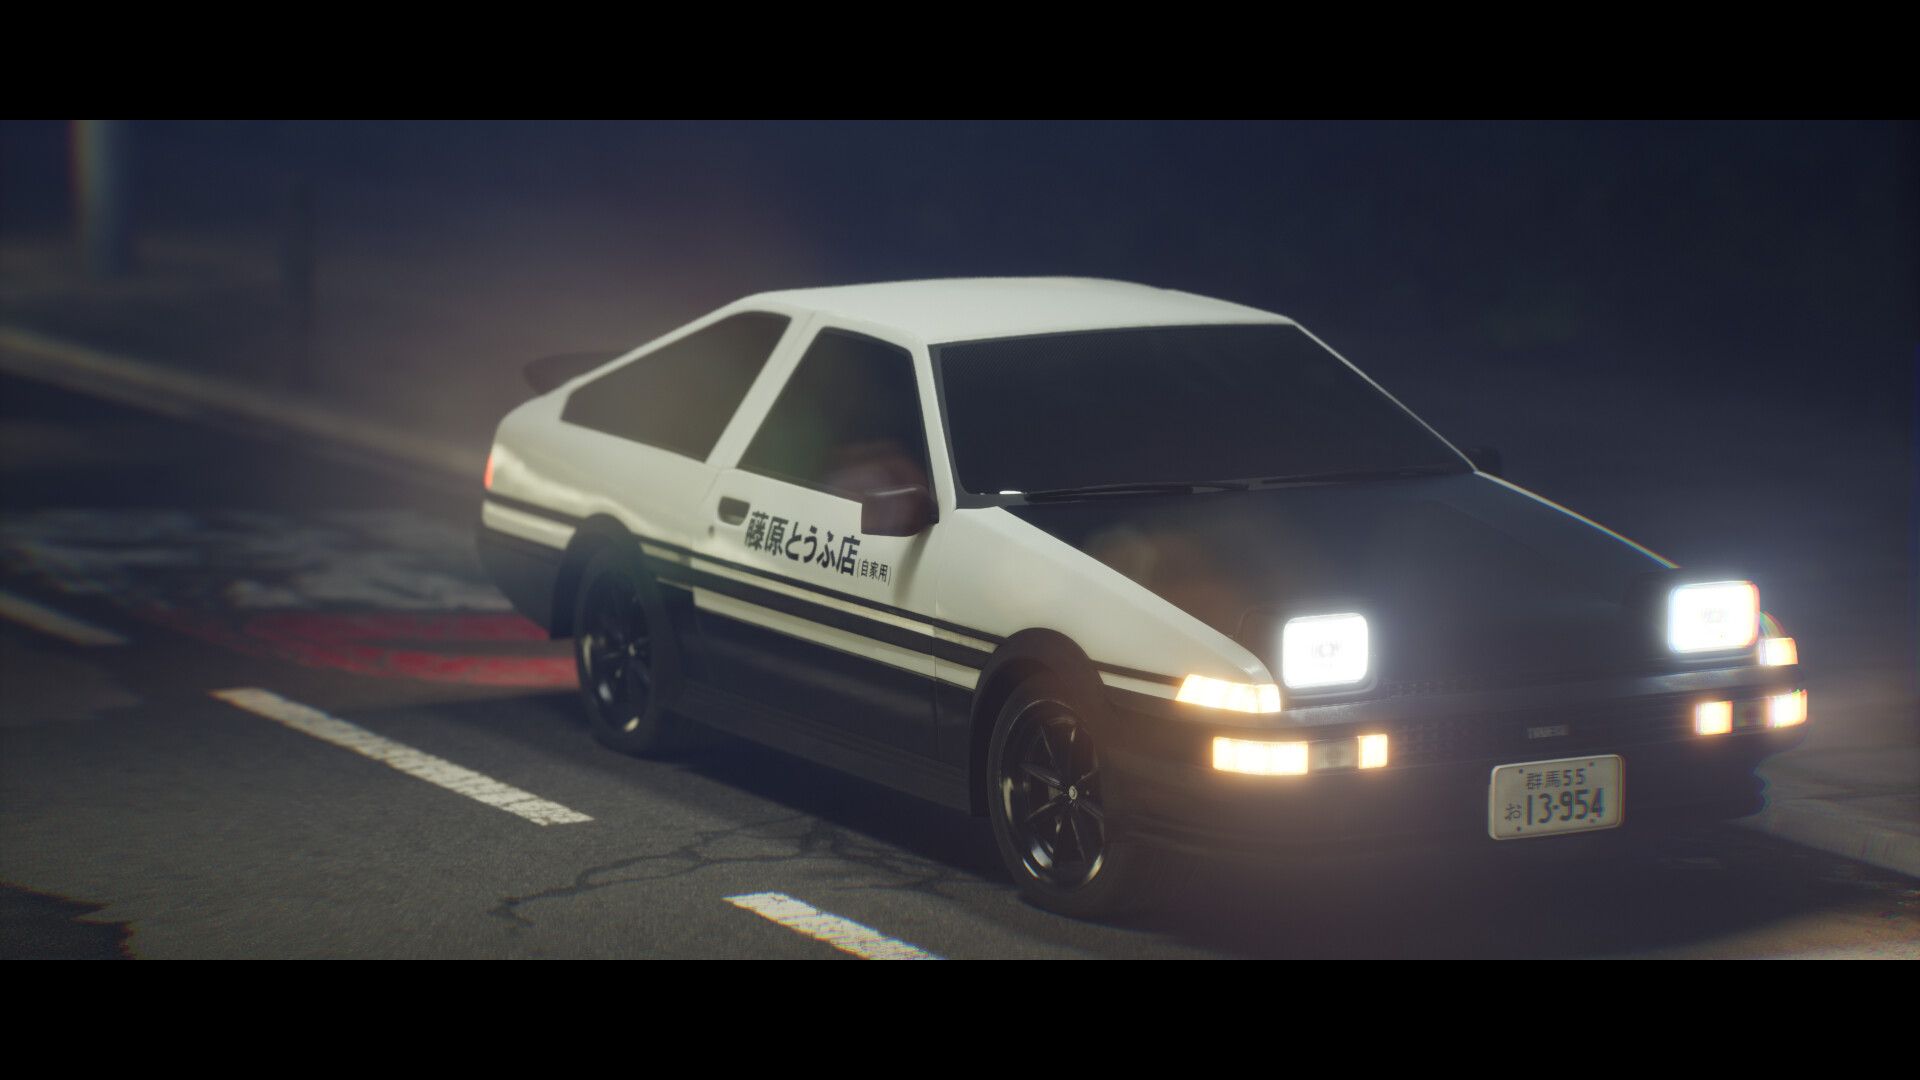 A car driving down the street at night - Toyota AE86